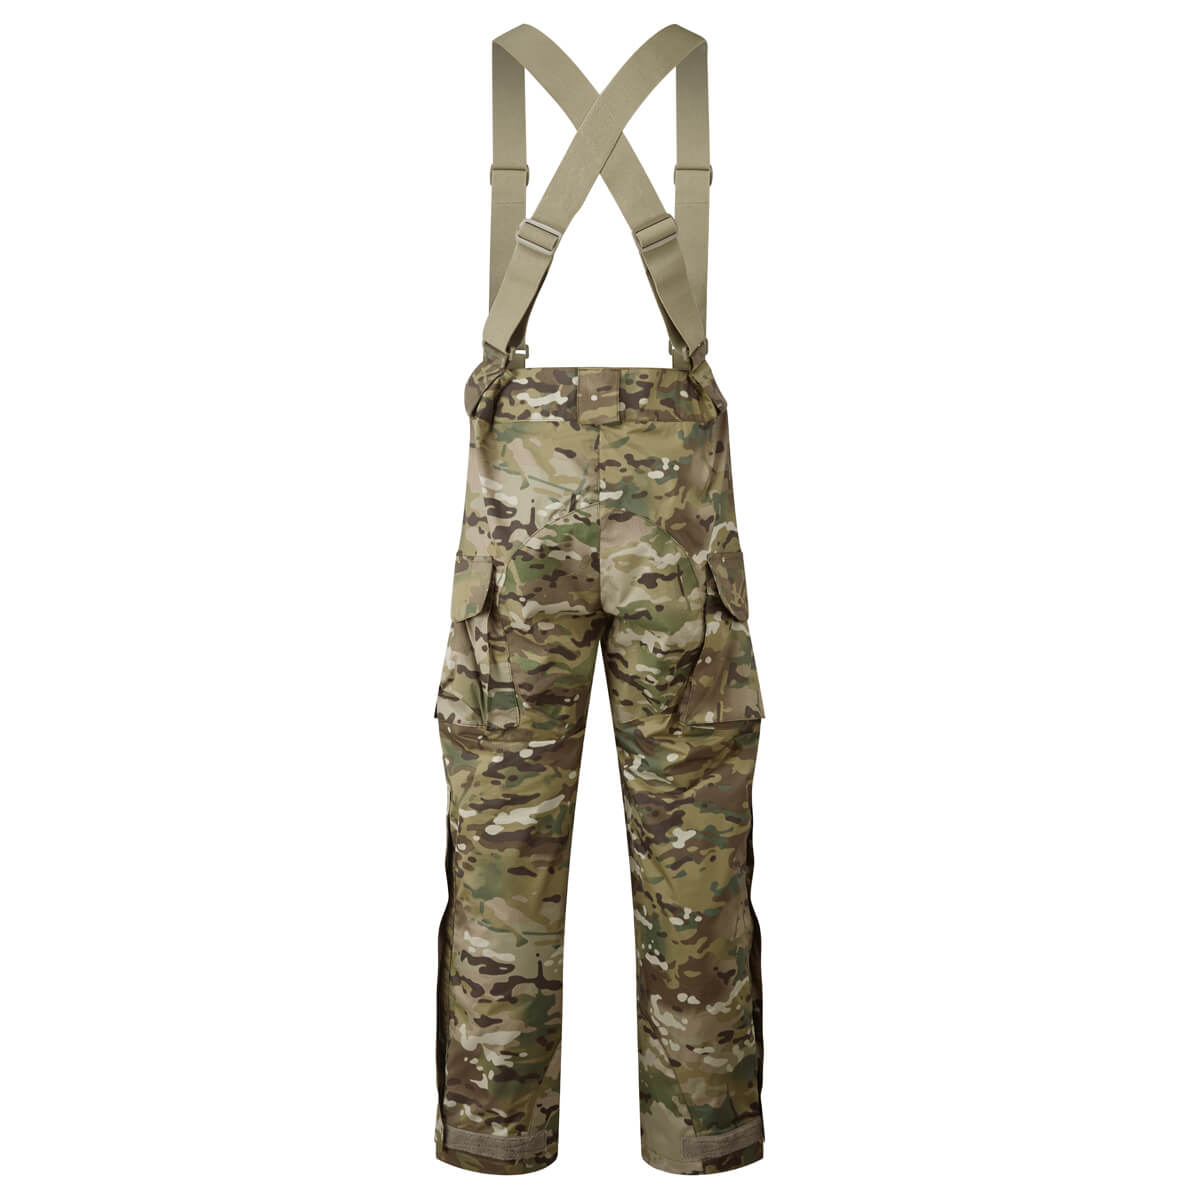 Keela Insulated FWP Foul Weather Pant Multicam